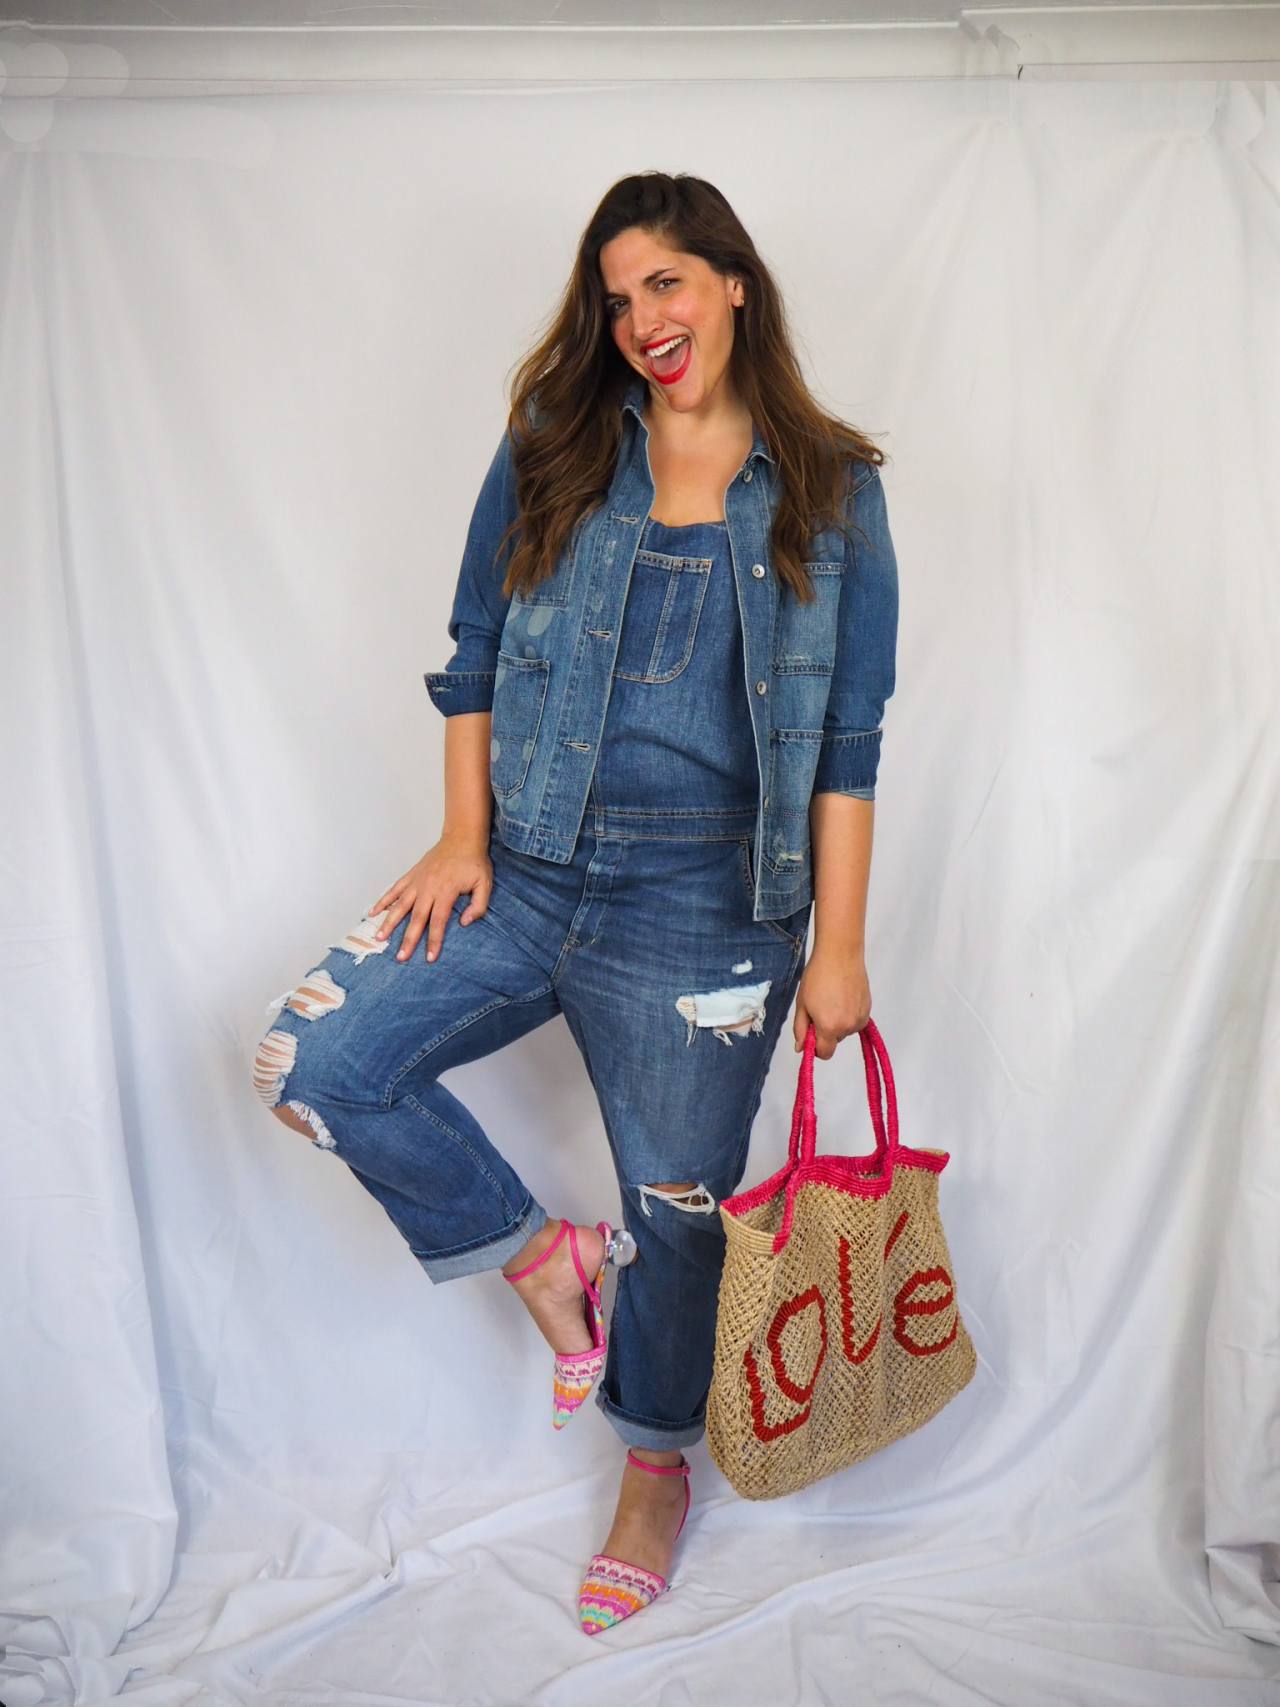 Double Denim Is In, Here Are 7 Ways To Wear It